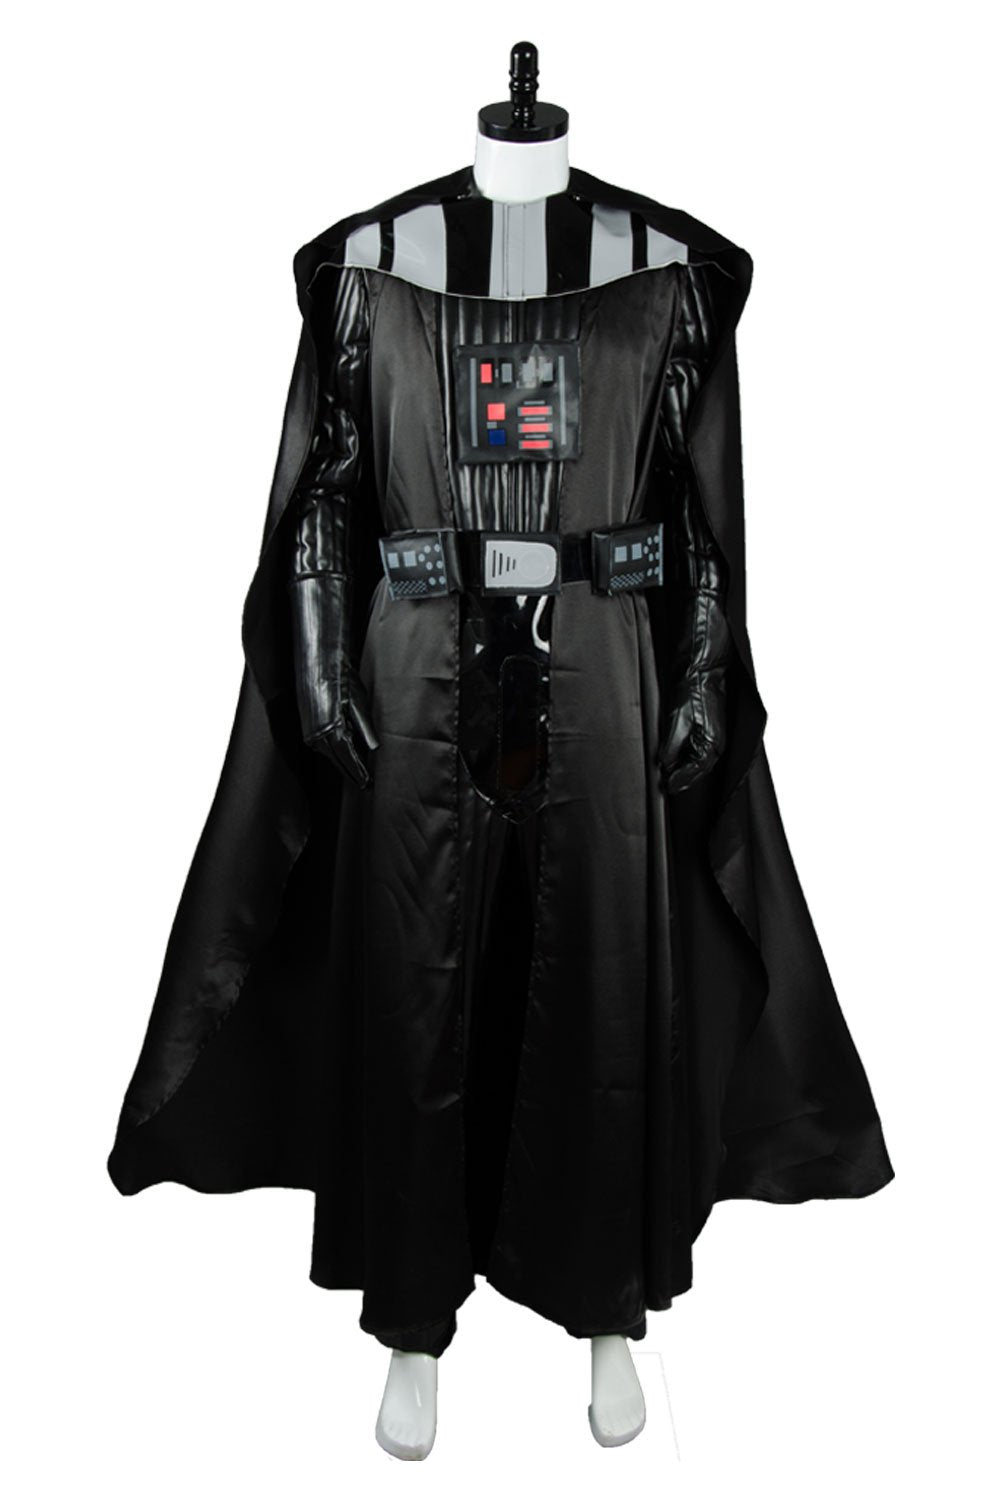 Darth Vader Outfit Suit Star Wars Halloween Cosplay Costume